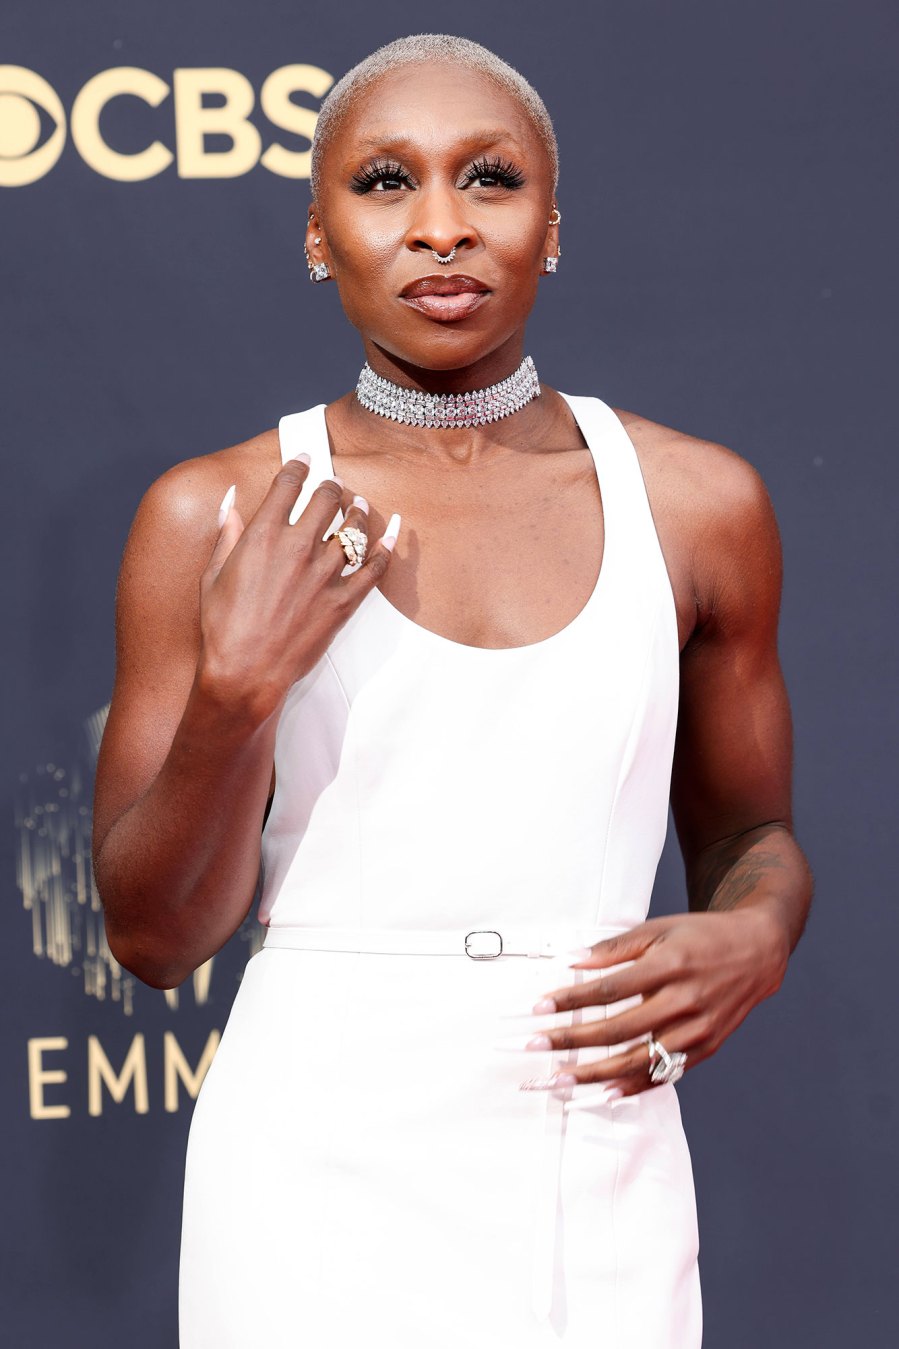 Cynthia Erivo Jewelry From the 2021 Emmys